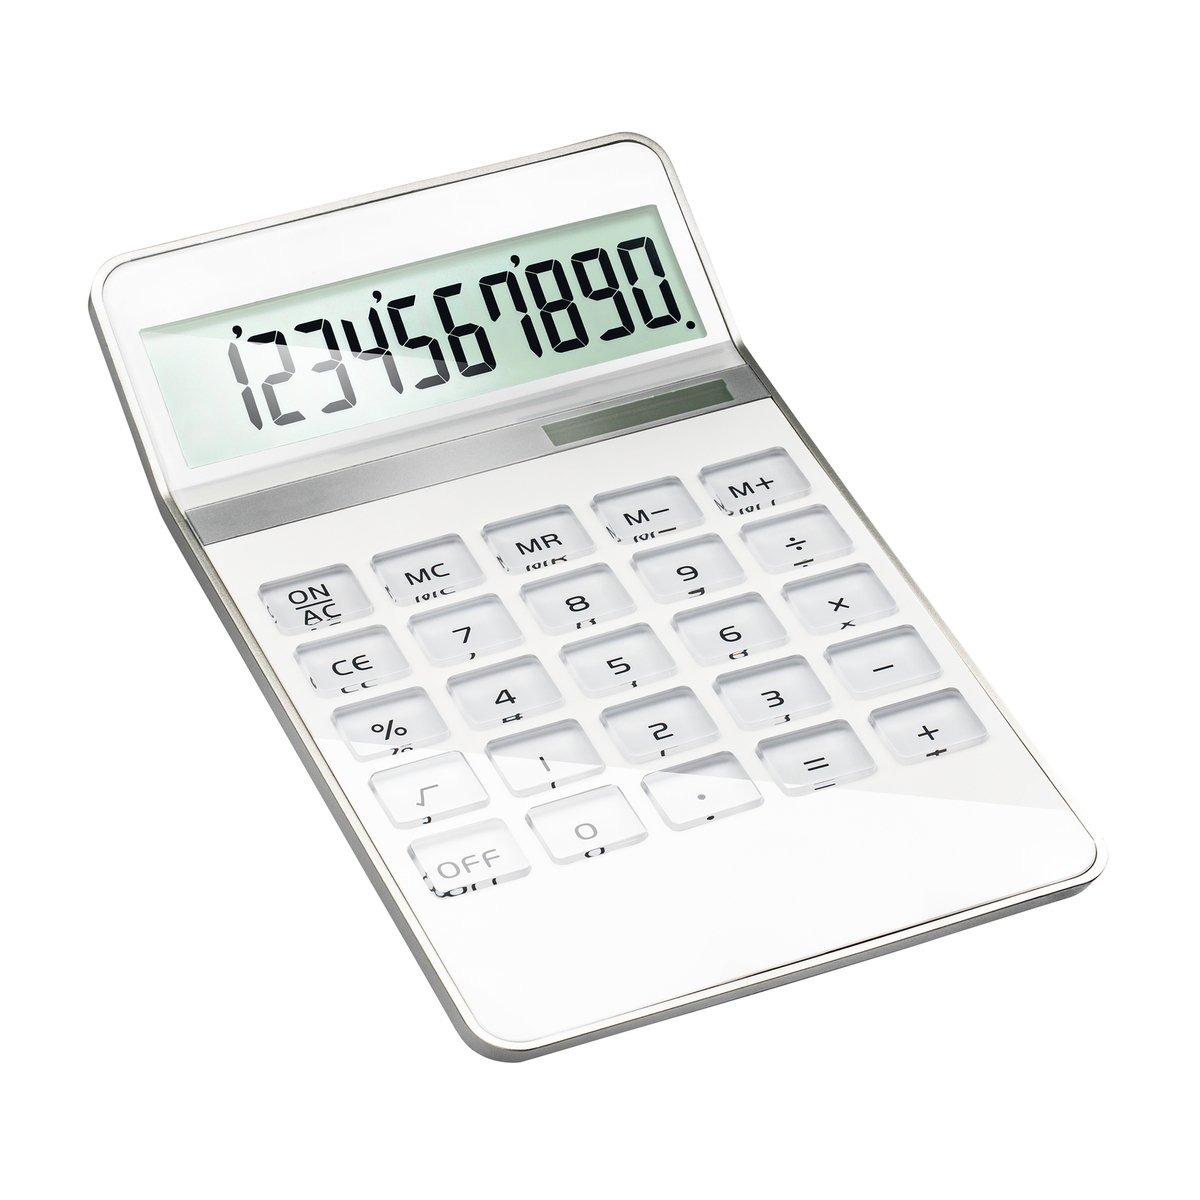 Calculatrice solaire REEVES-NEAPEL blanc